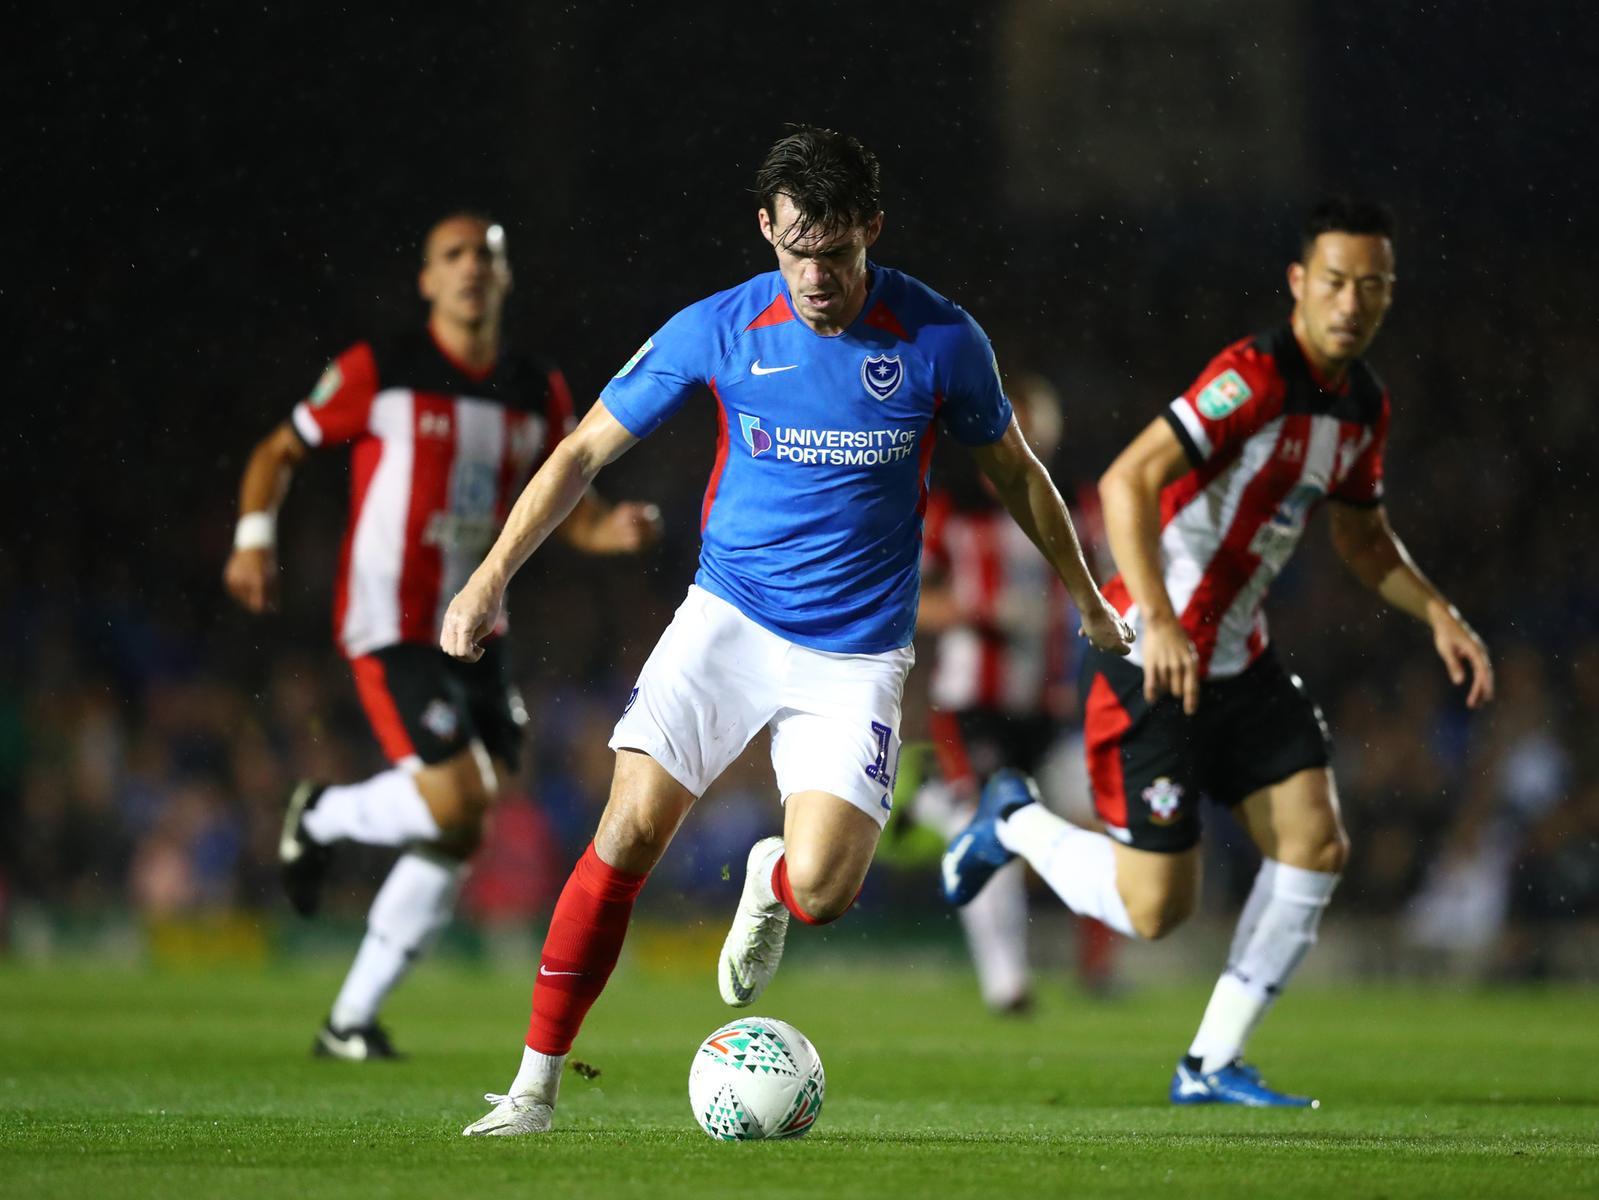 They've lost just one league game in eight, and are improving as the season goes on. John Marquis finding some goal scoring form will be key to their hopes of promotion.